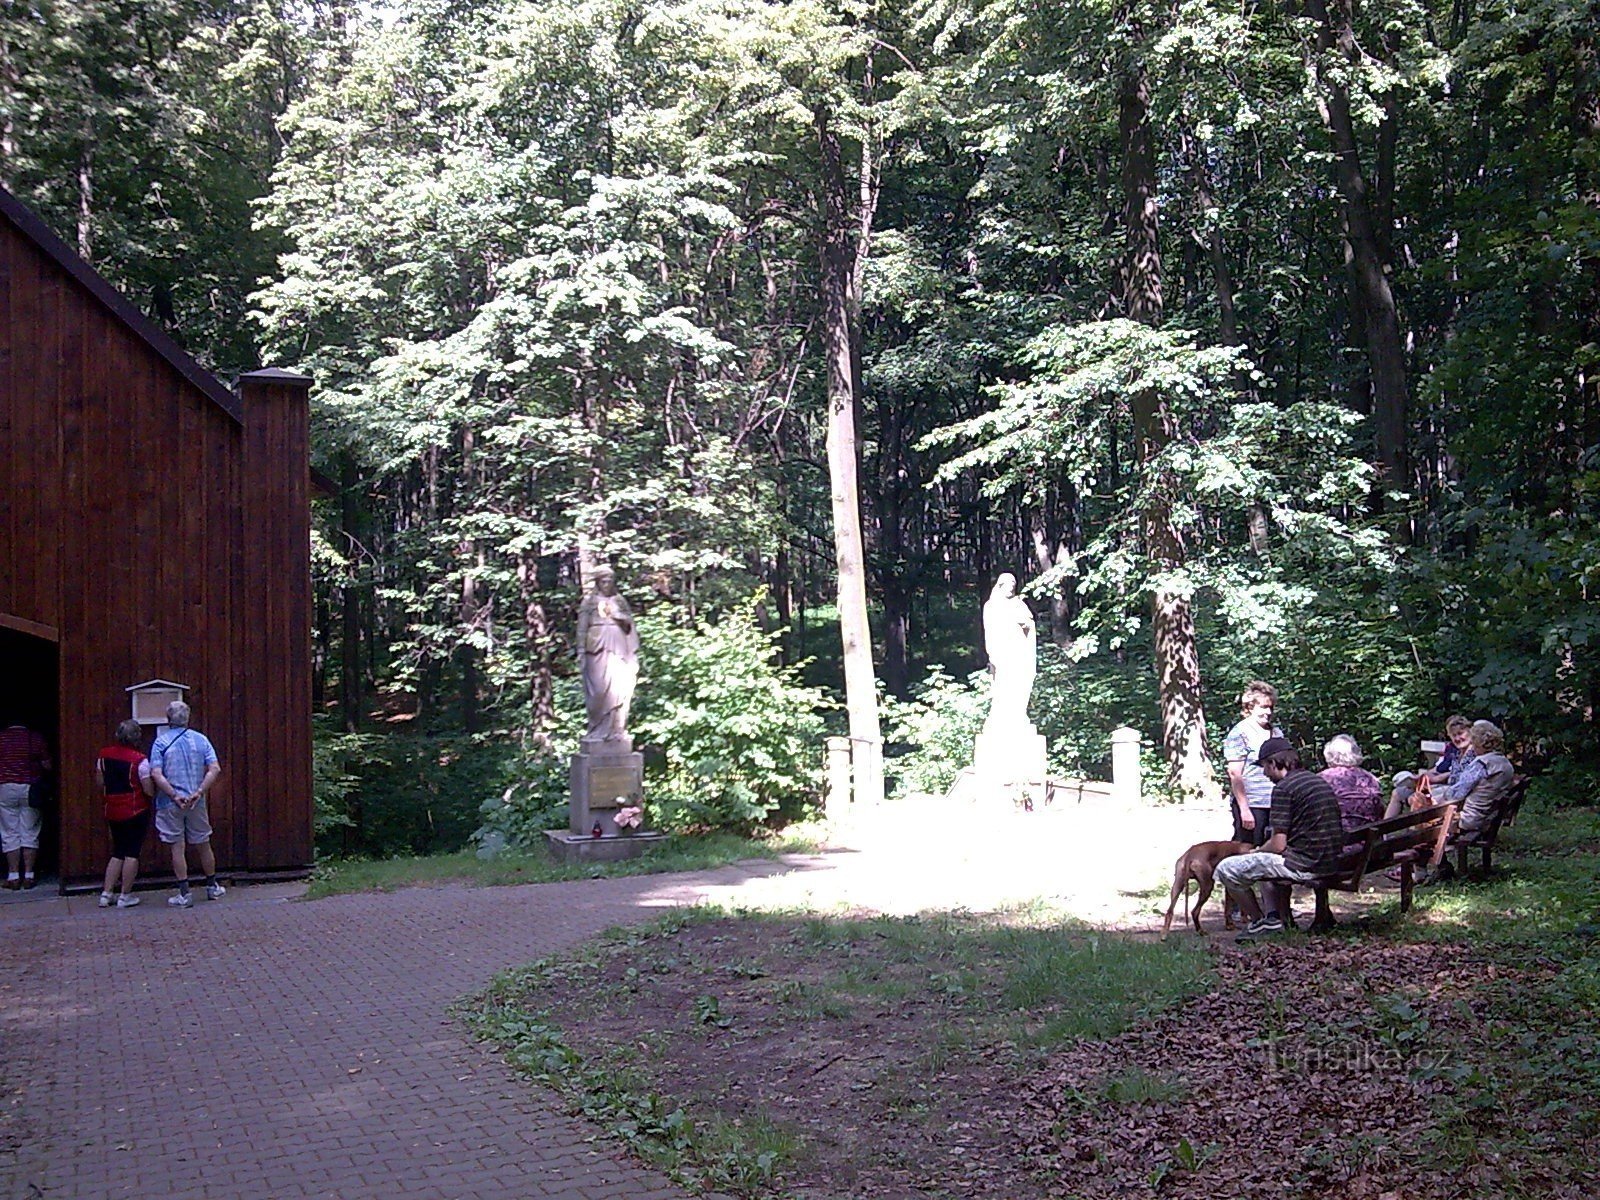 Statues by the chapel with seating.